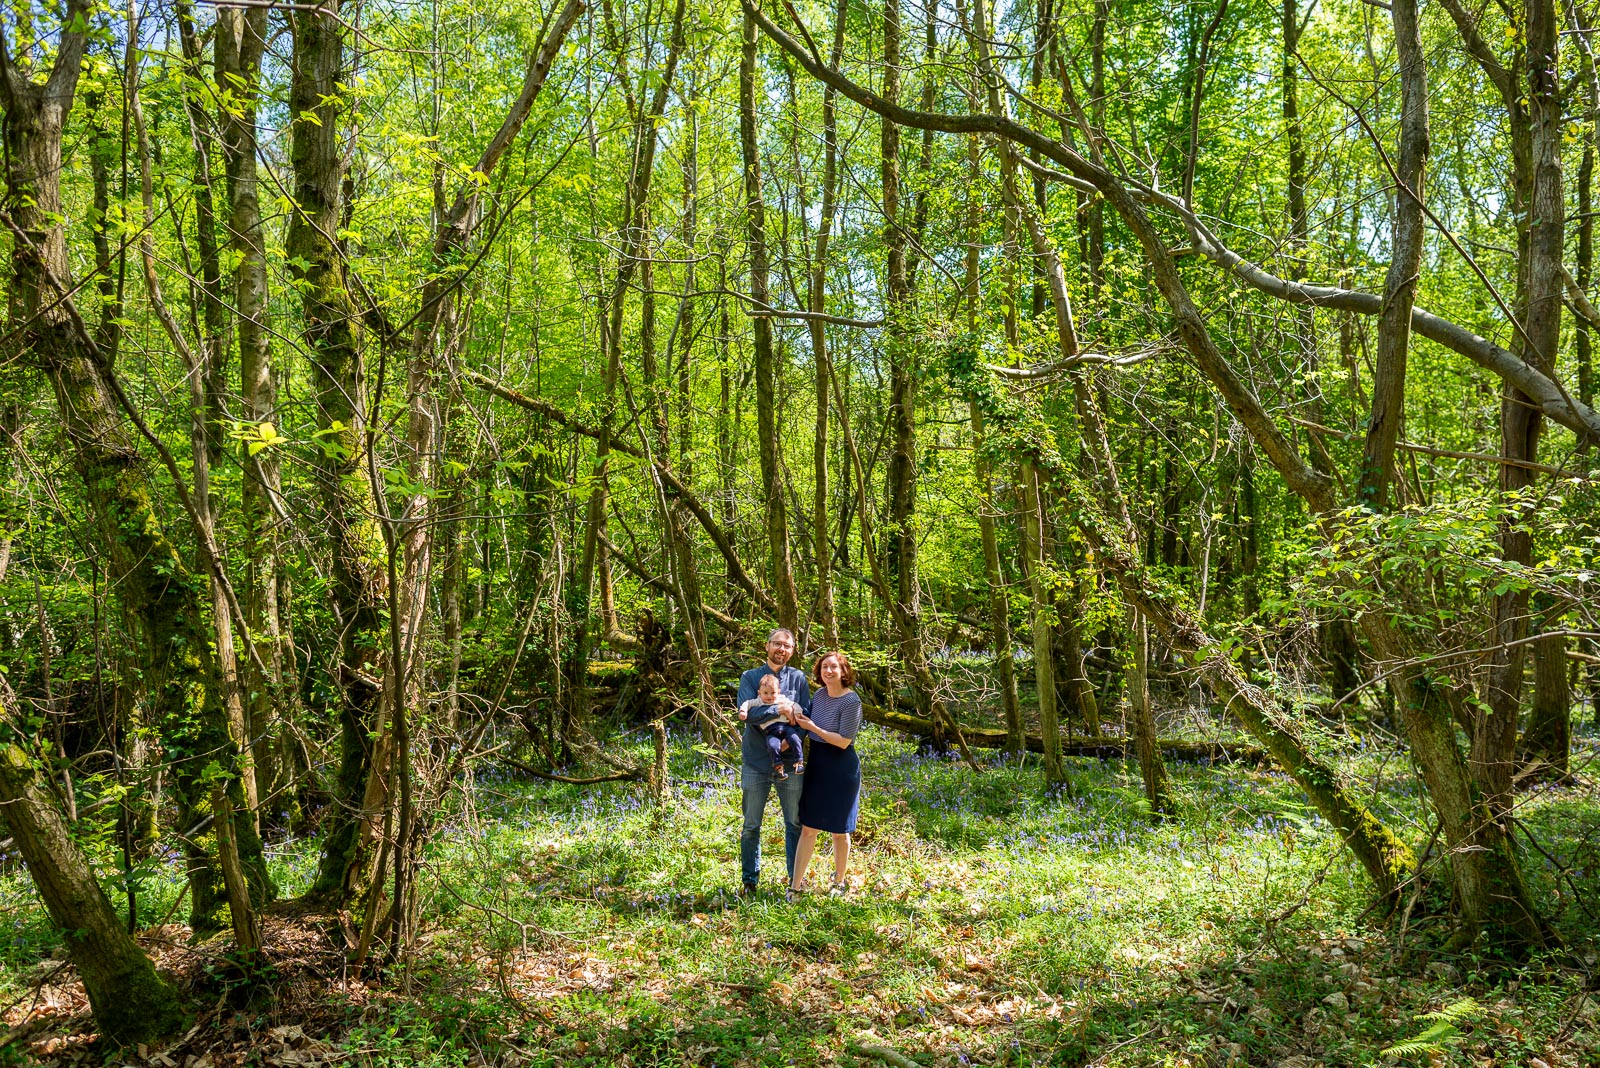 Neill, Alexis and their eight month old baby Alasdair smile at the camera in a super wide angle photograph among the bluebells at Battle Great Woods.